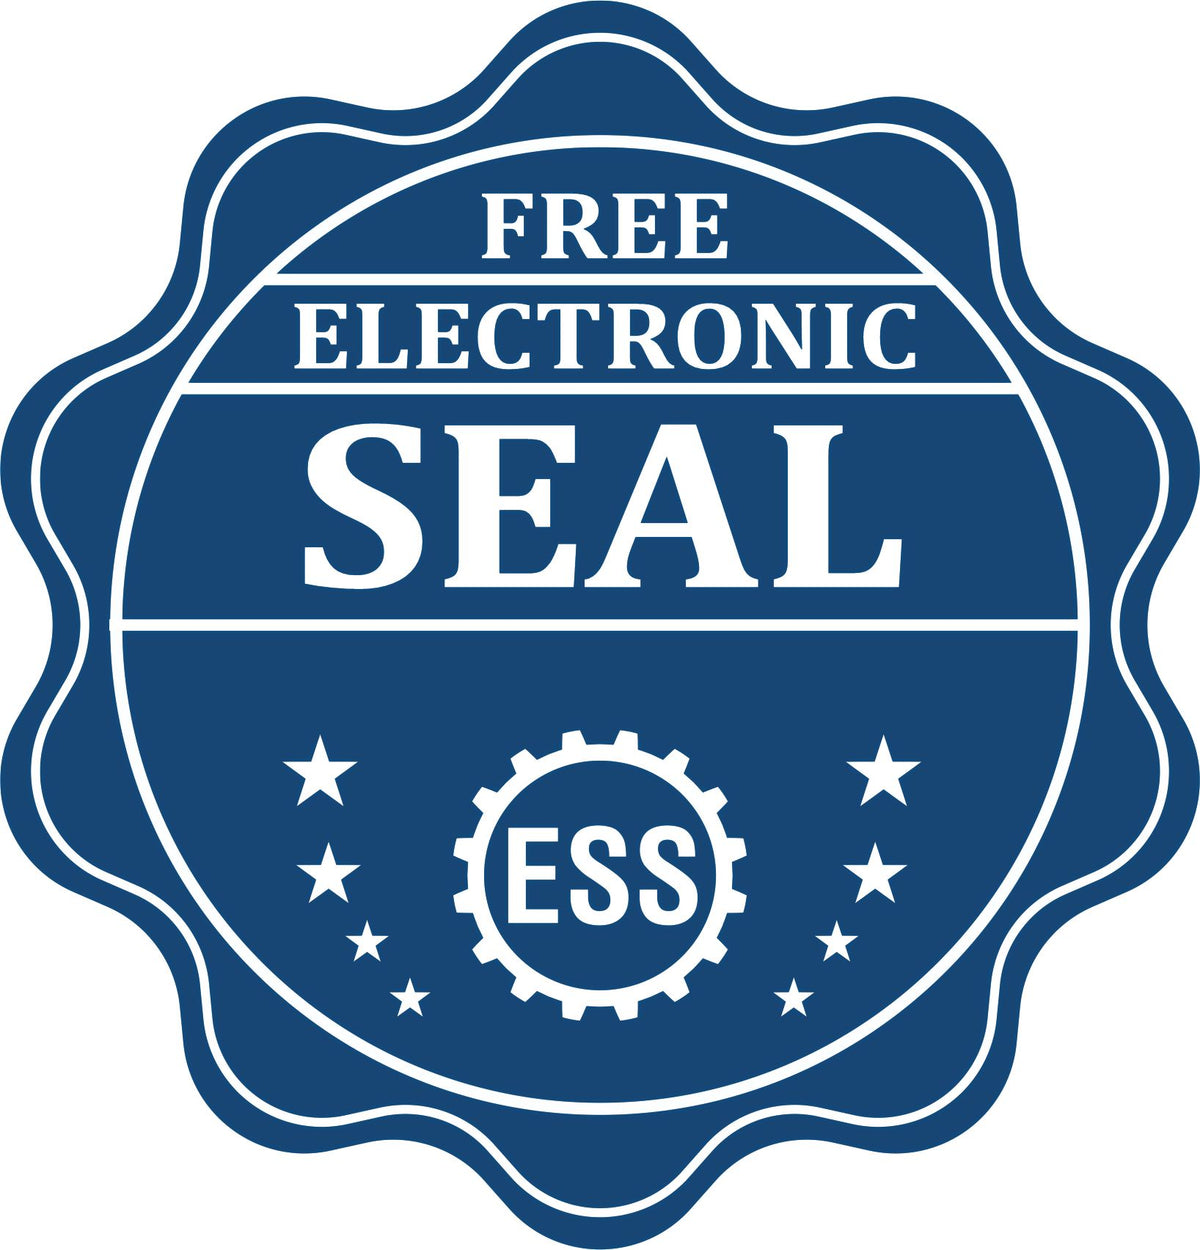 A badge showing a free electronic seal for the Self-Inking Utah Landscape Architect Stamp with stars and the ESS gear on the emblem.